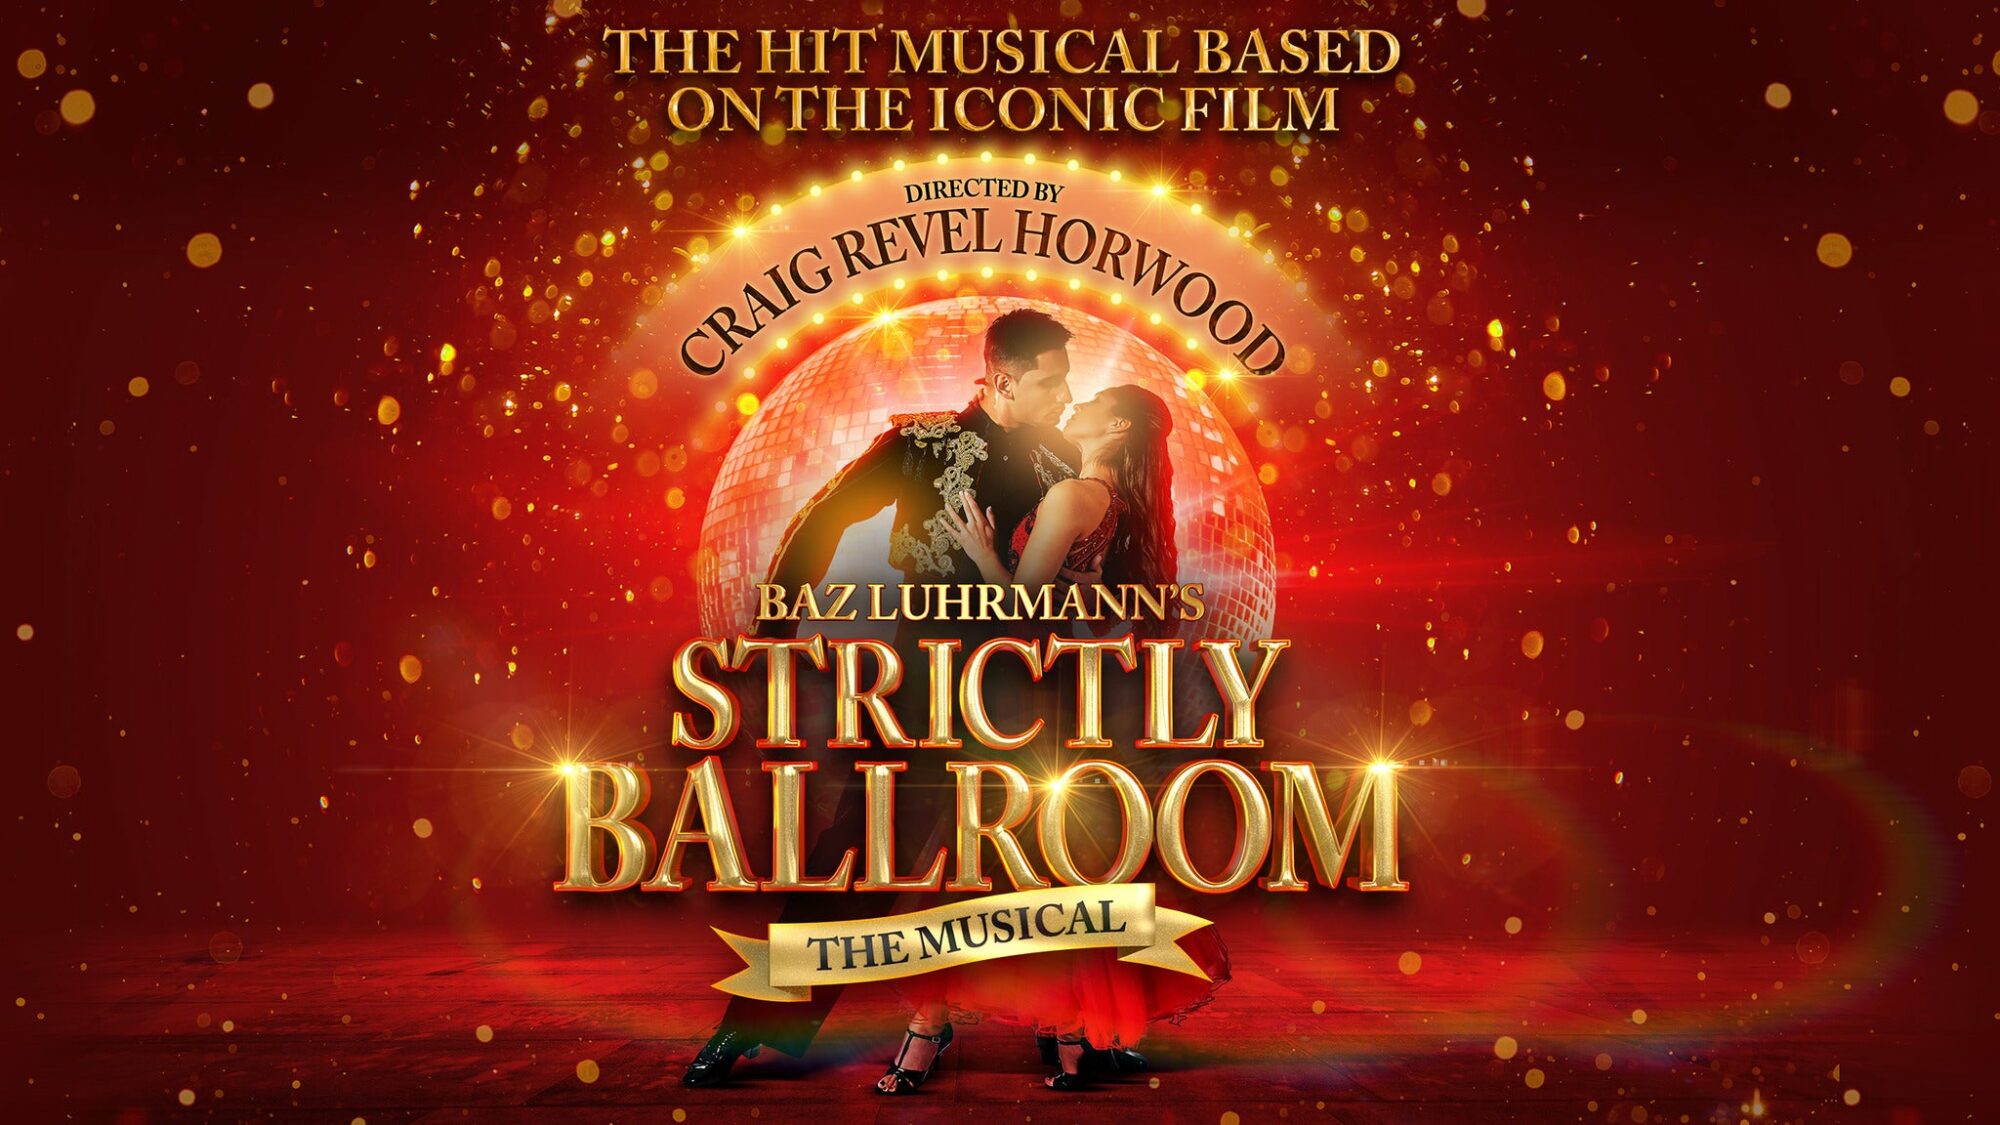 Image name Strictly Ballroom The Musical at Hull New Theatre Hull the 4 image from the post Events in Yorkshire.com.